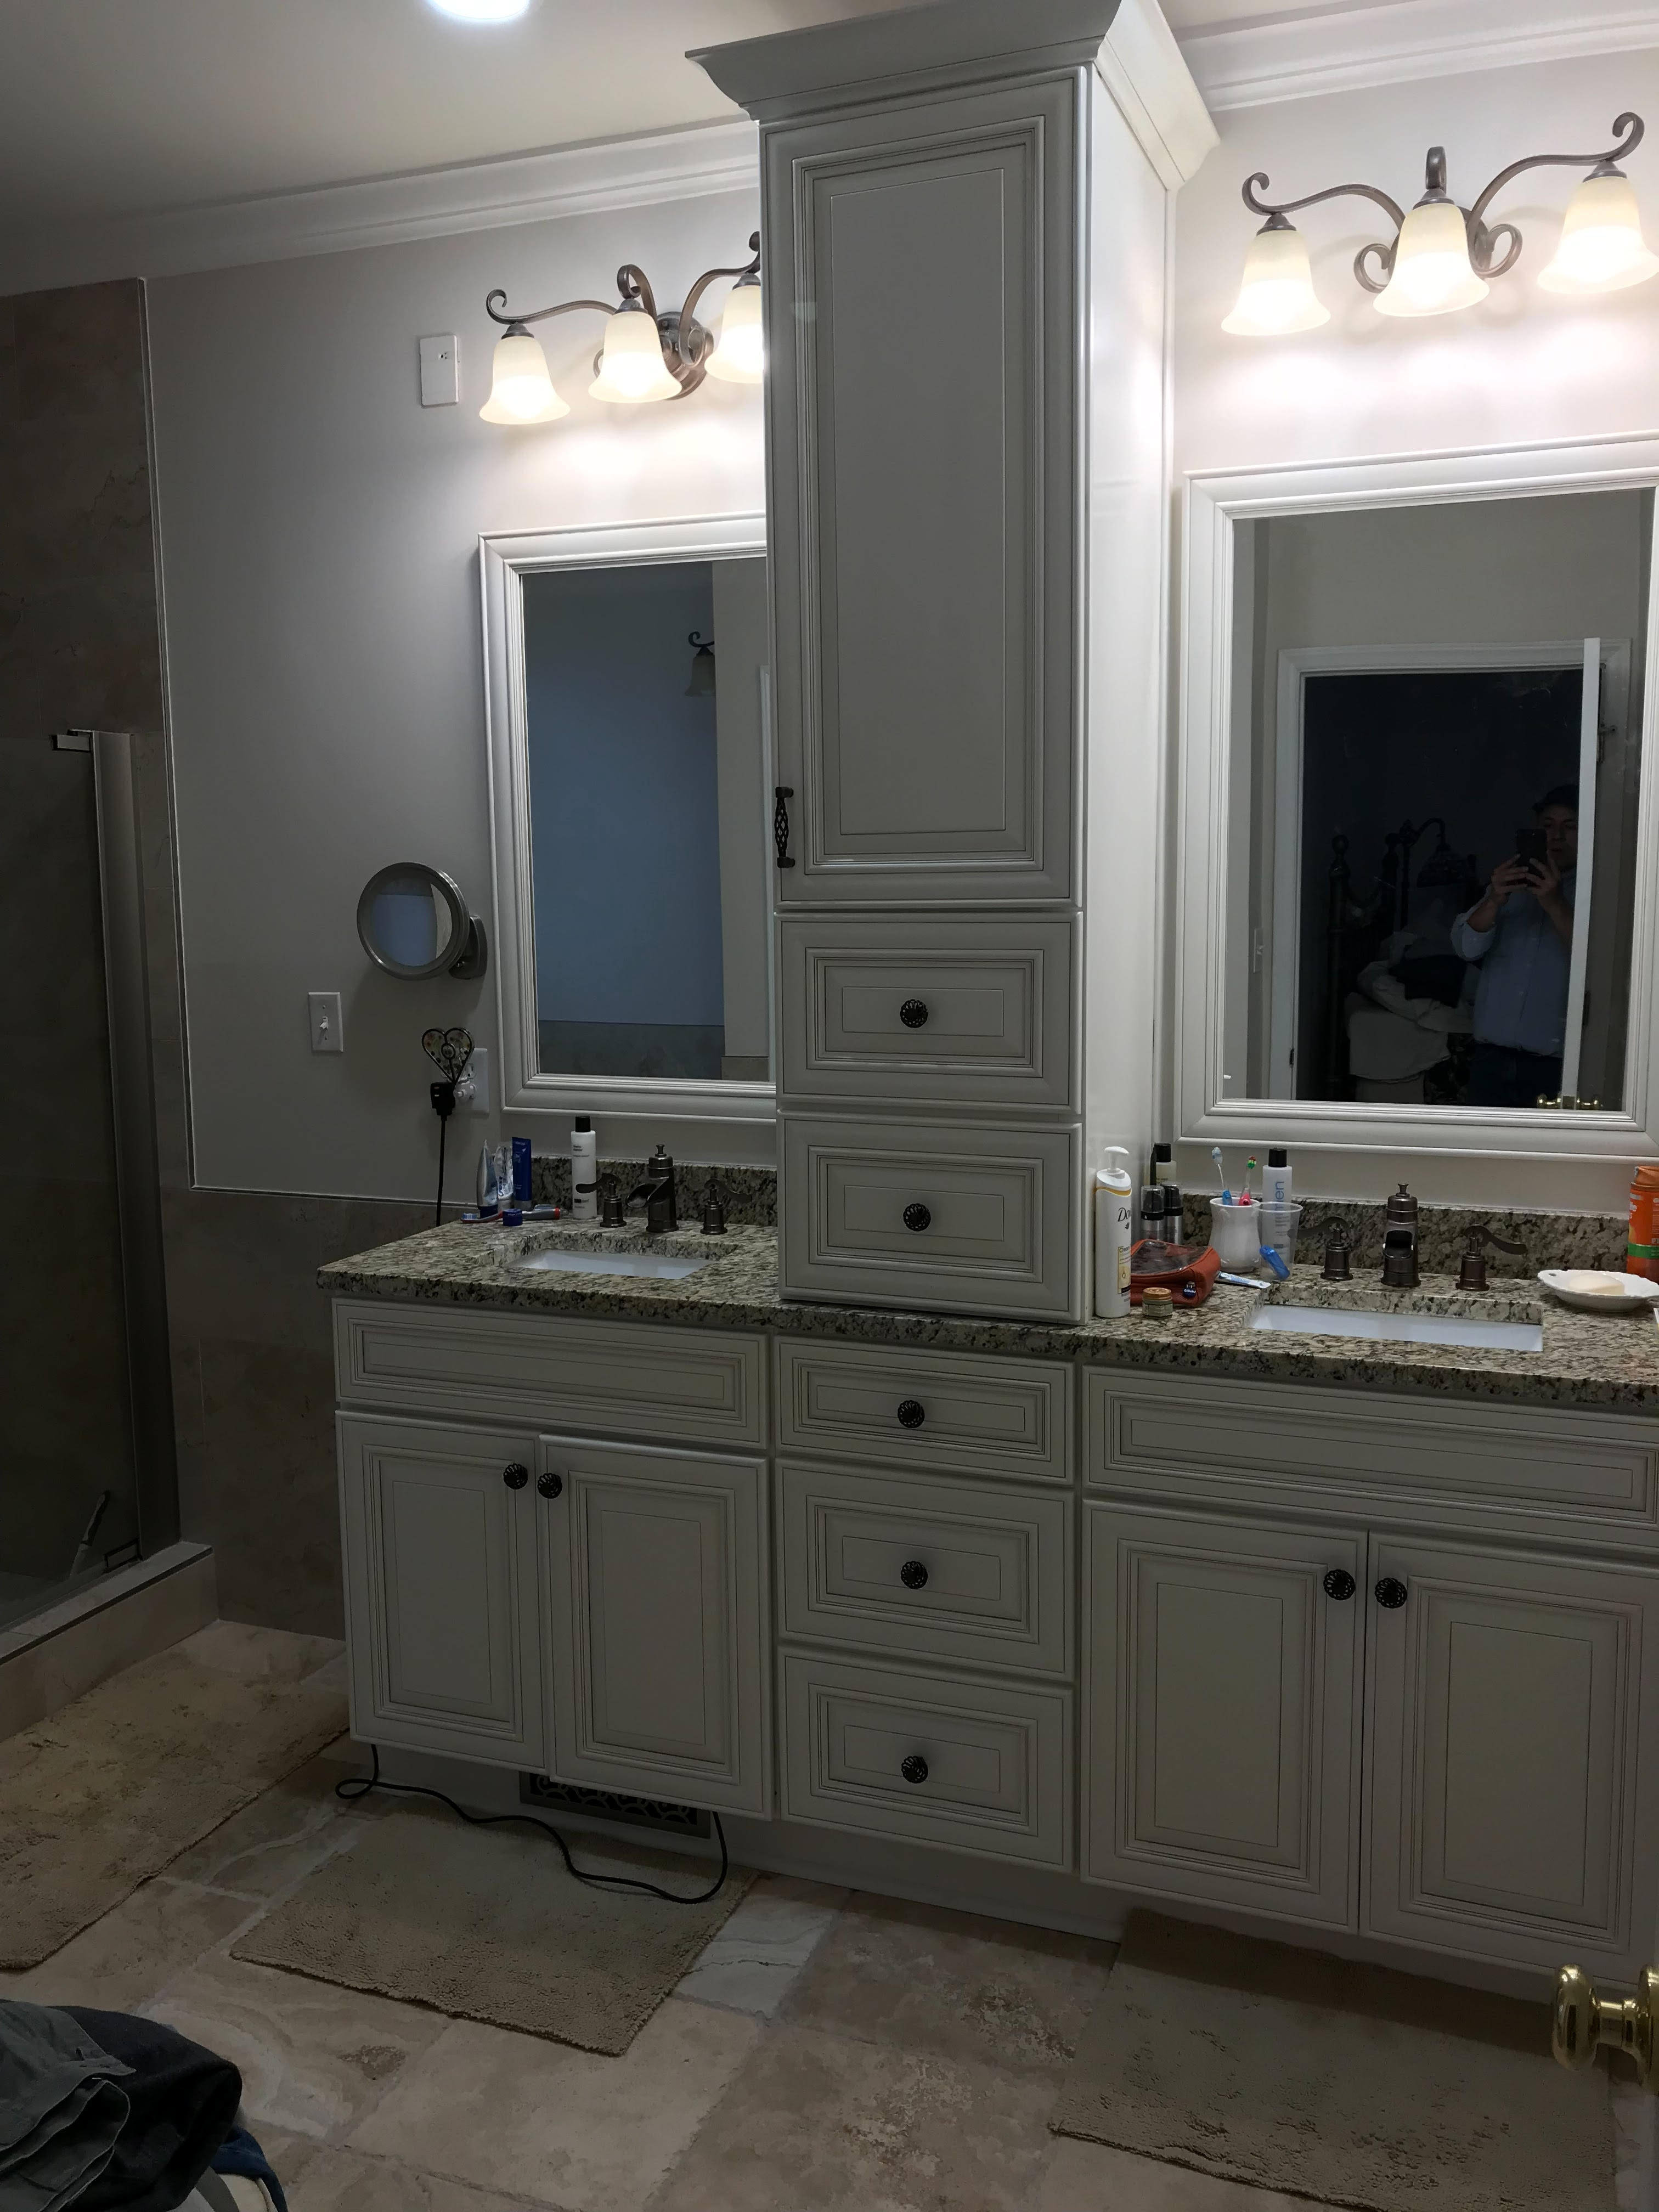 Double mirrors with double sinks